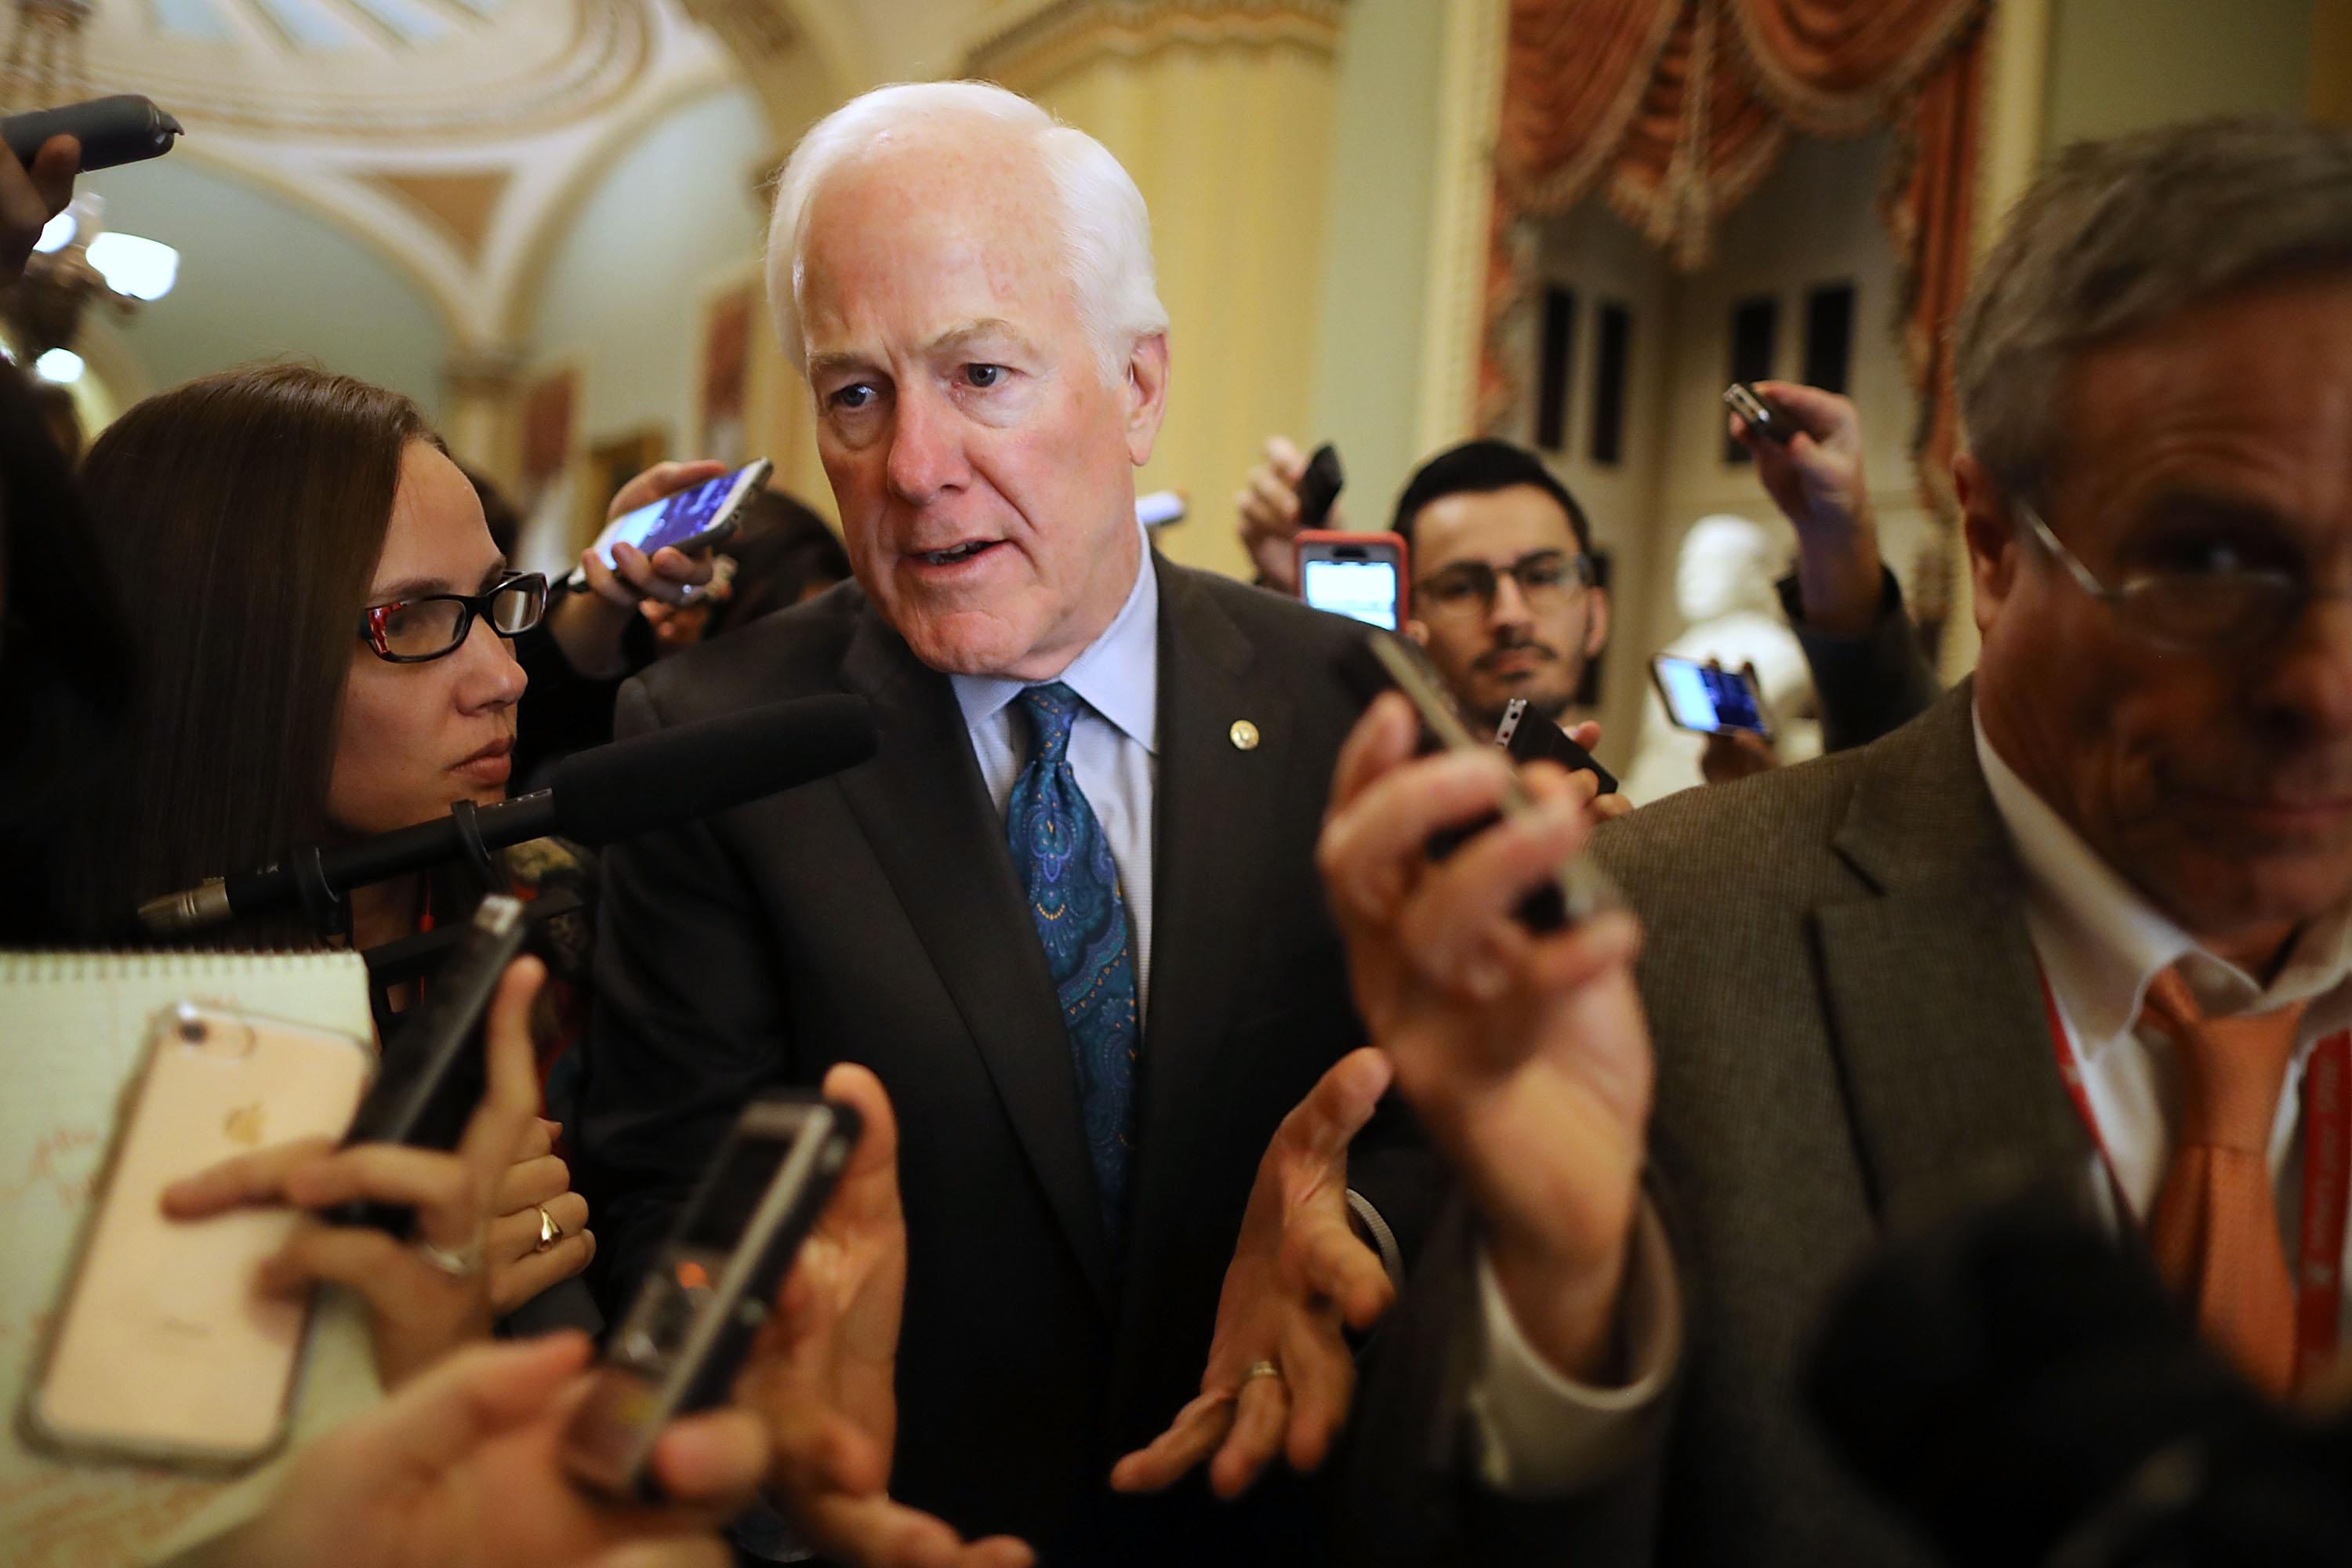 WASHINGTON, DC - NOVEMBER 30:  Senate Majority Whip John Cornyn (R-TX) talks to reporters at the U.S. Capitol November 30, 2017 in Washington, DC. The Senate is debating the proposed GOP tax reform bill and hopes to pass it before the end of the week.  (Photo by Chip Somodevilla/Getty Images)